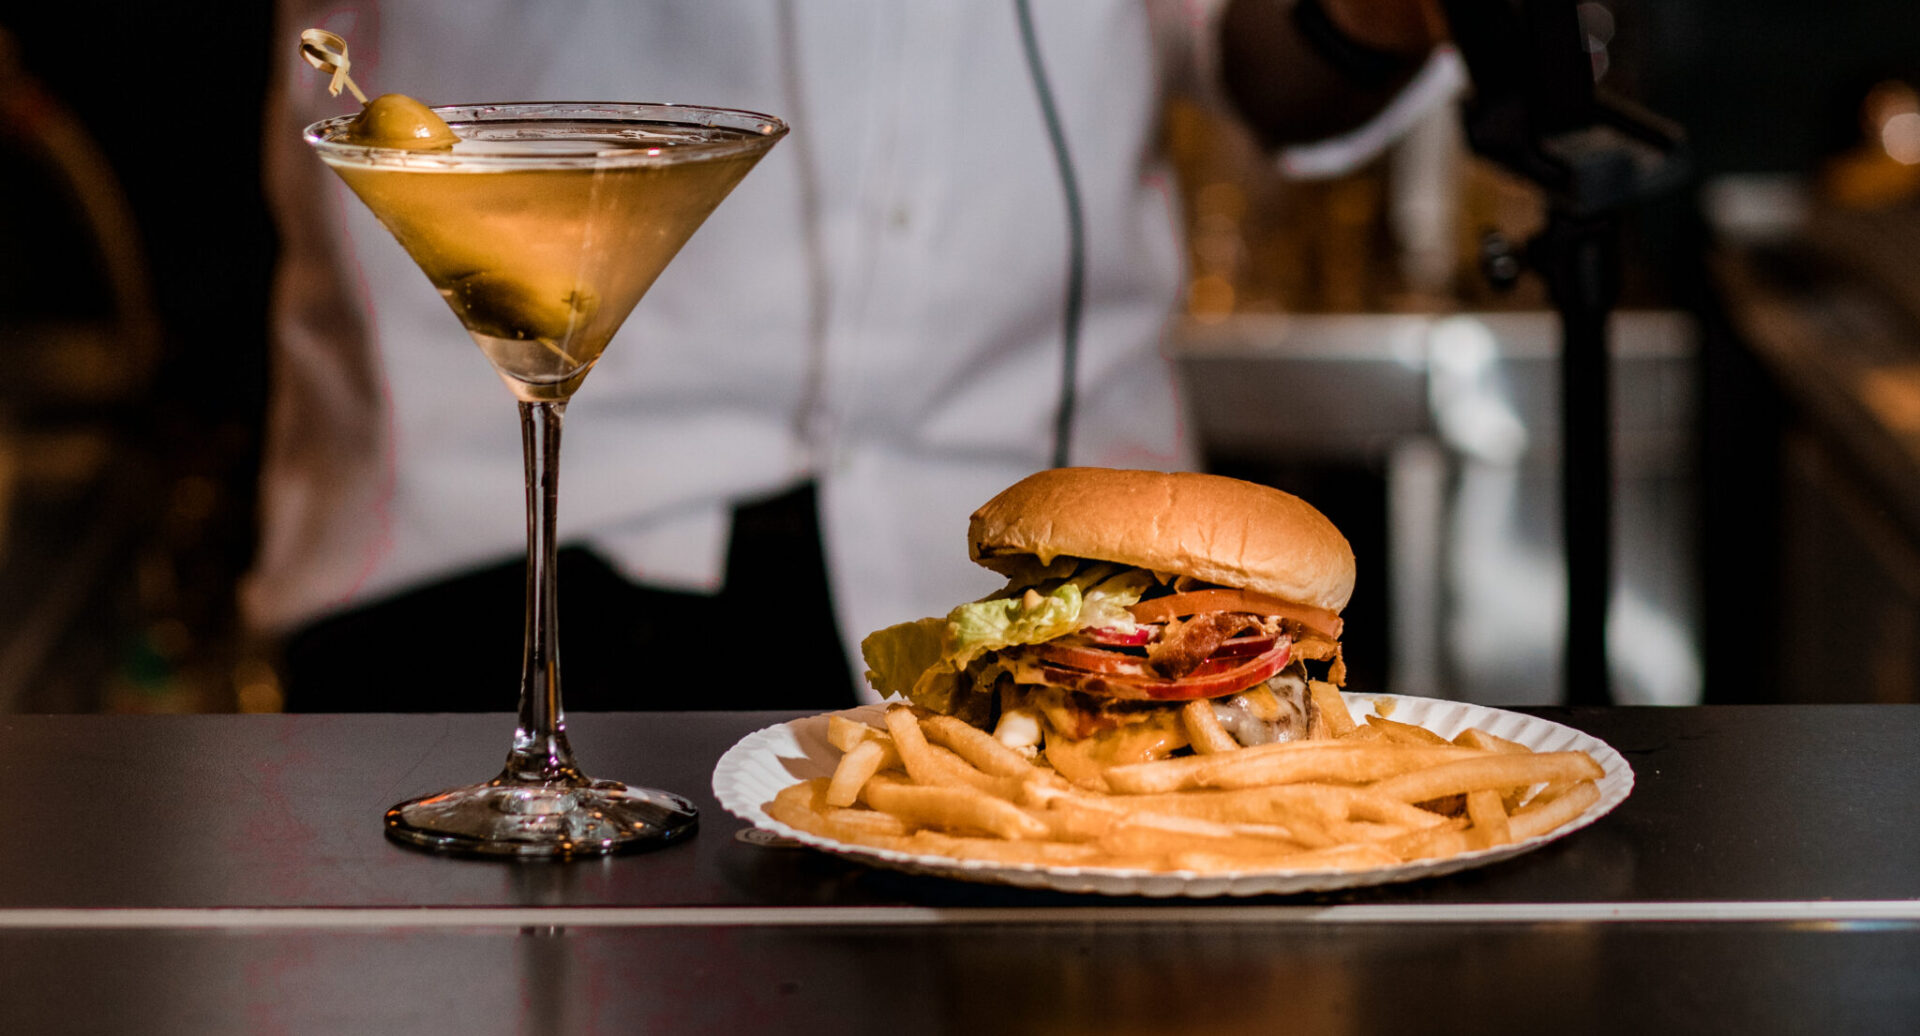 There is a burger and fries on a plate with a martini next to the food.